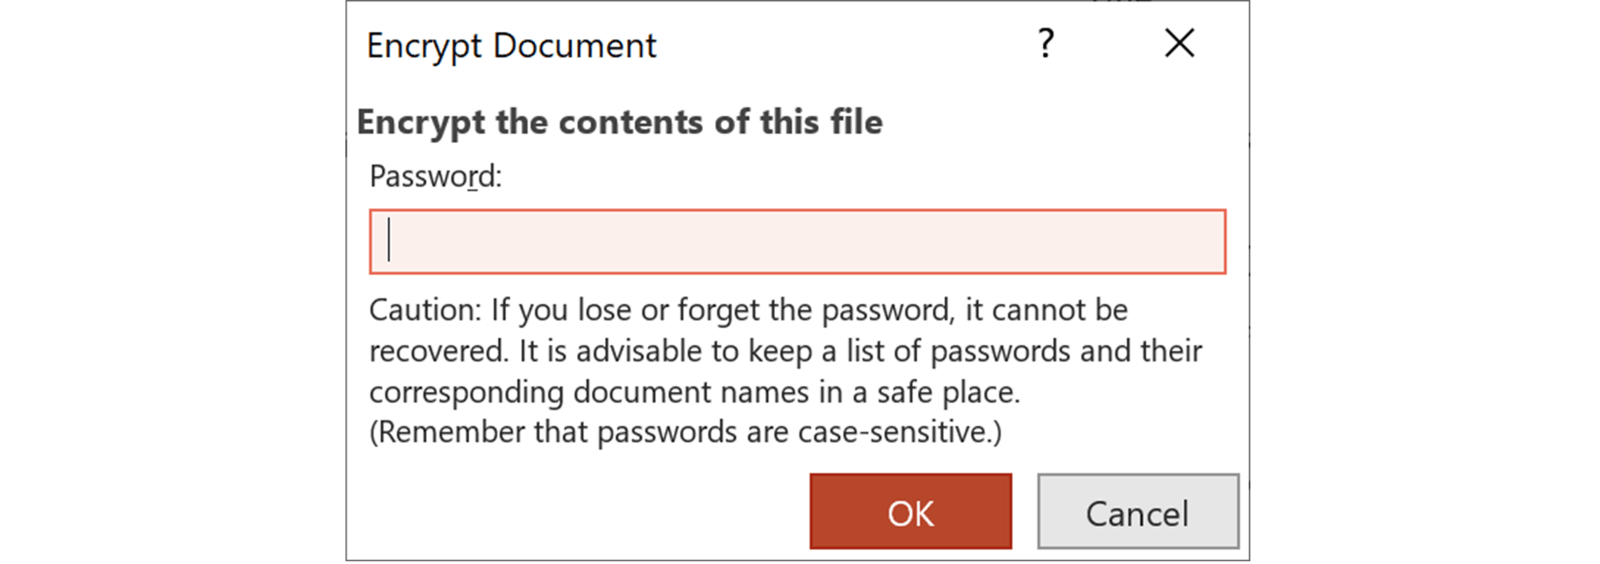 Screenshot of the Encrypt Document pop up. The user has an option to add a password. 